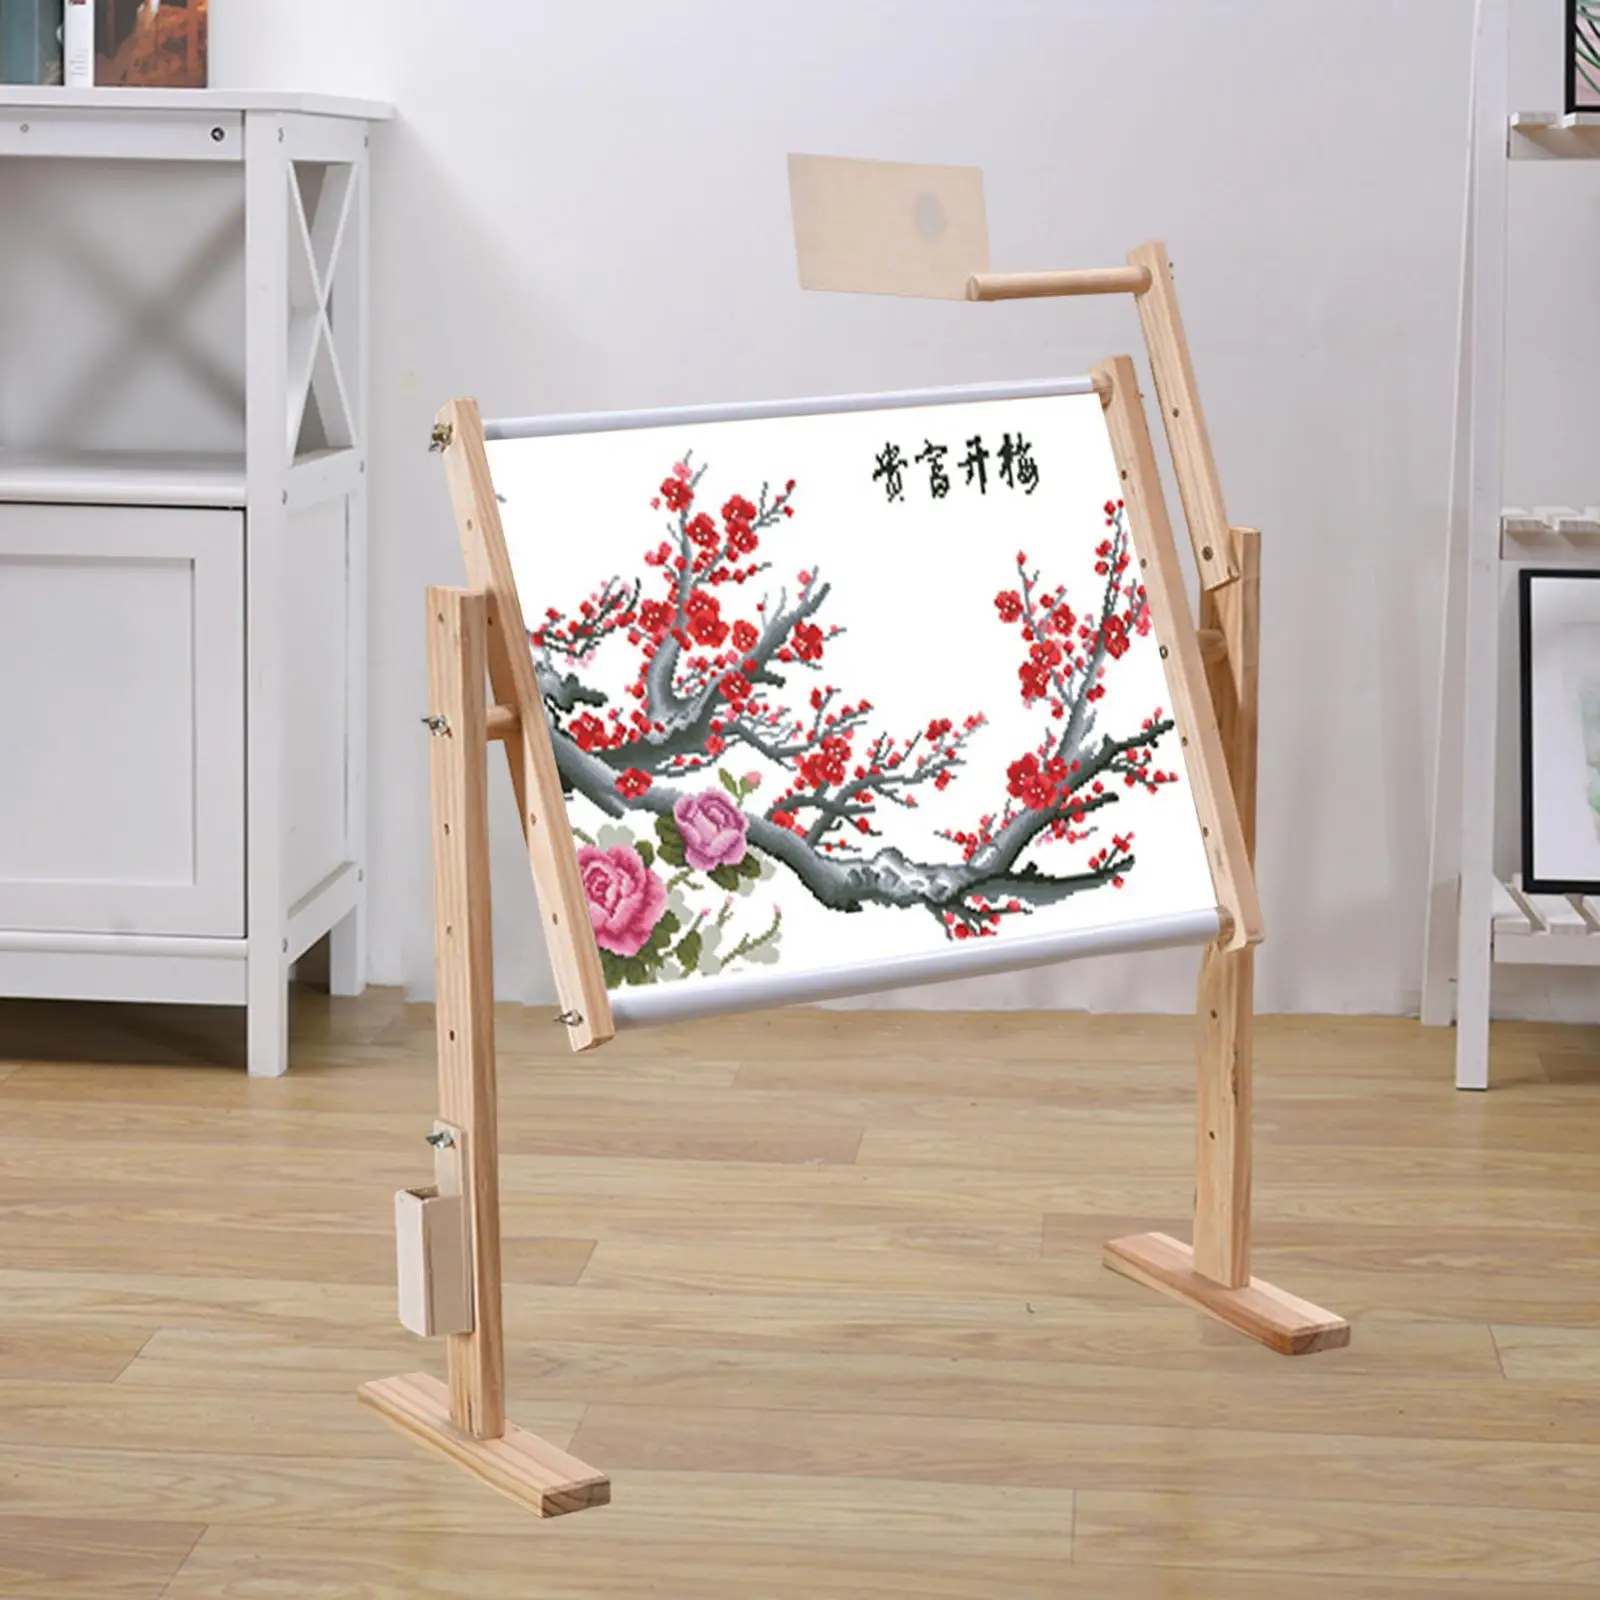 Adjustable Wood Embroidery Frame Stand Cross Stitch Rack Holder Embroidery Lap Stand Table Needlework Sewing Tools